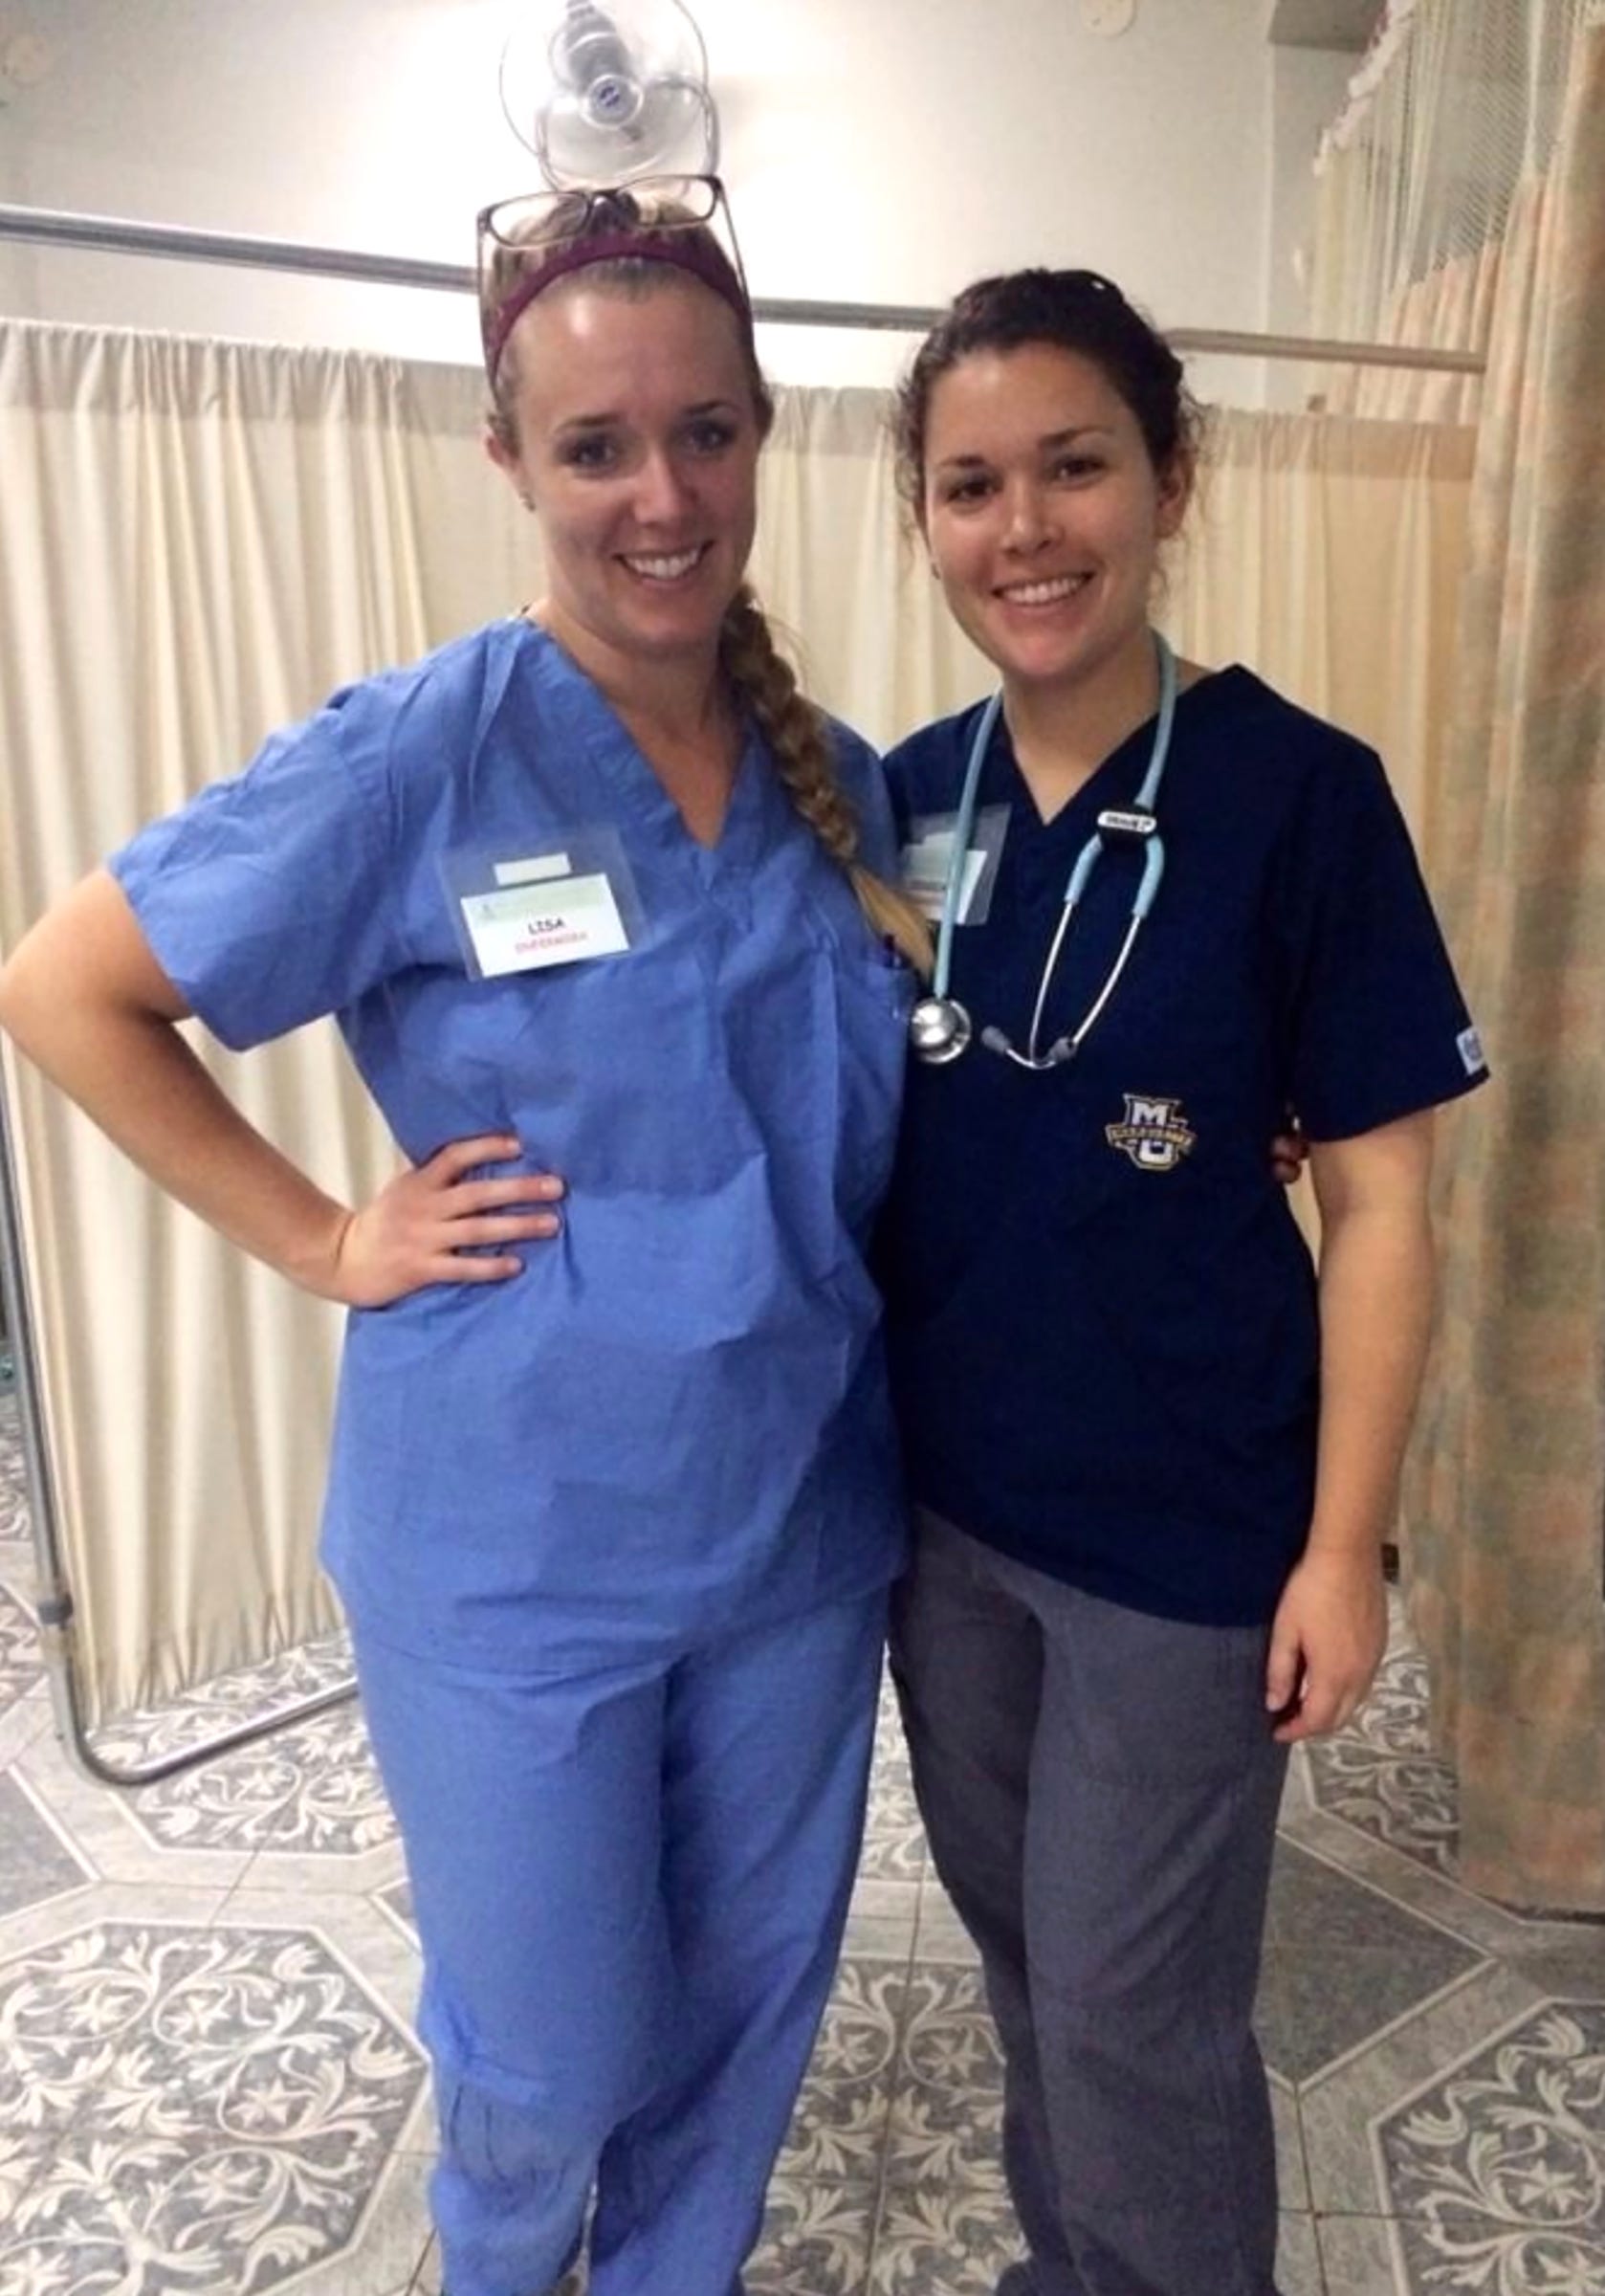 Nurse Jessica Rosing, right, says she was attacked by a patient in March 2016 at St. Luke's Medical Center in Milwaukee. He put a syringe to her neck and yanked her shoulder. Rosing needed surgery and says she had to leave bedside nursing as a result of the assault. Nurse Lisa Mader, left, says patients lost an excellent caregiver.